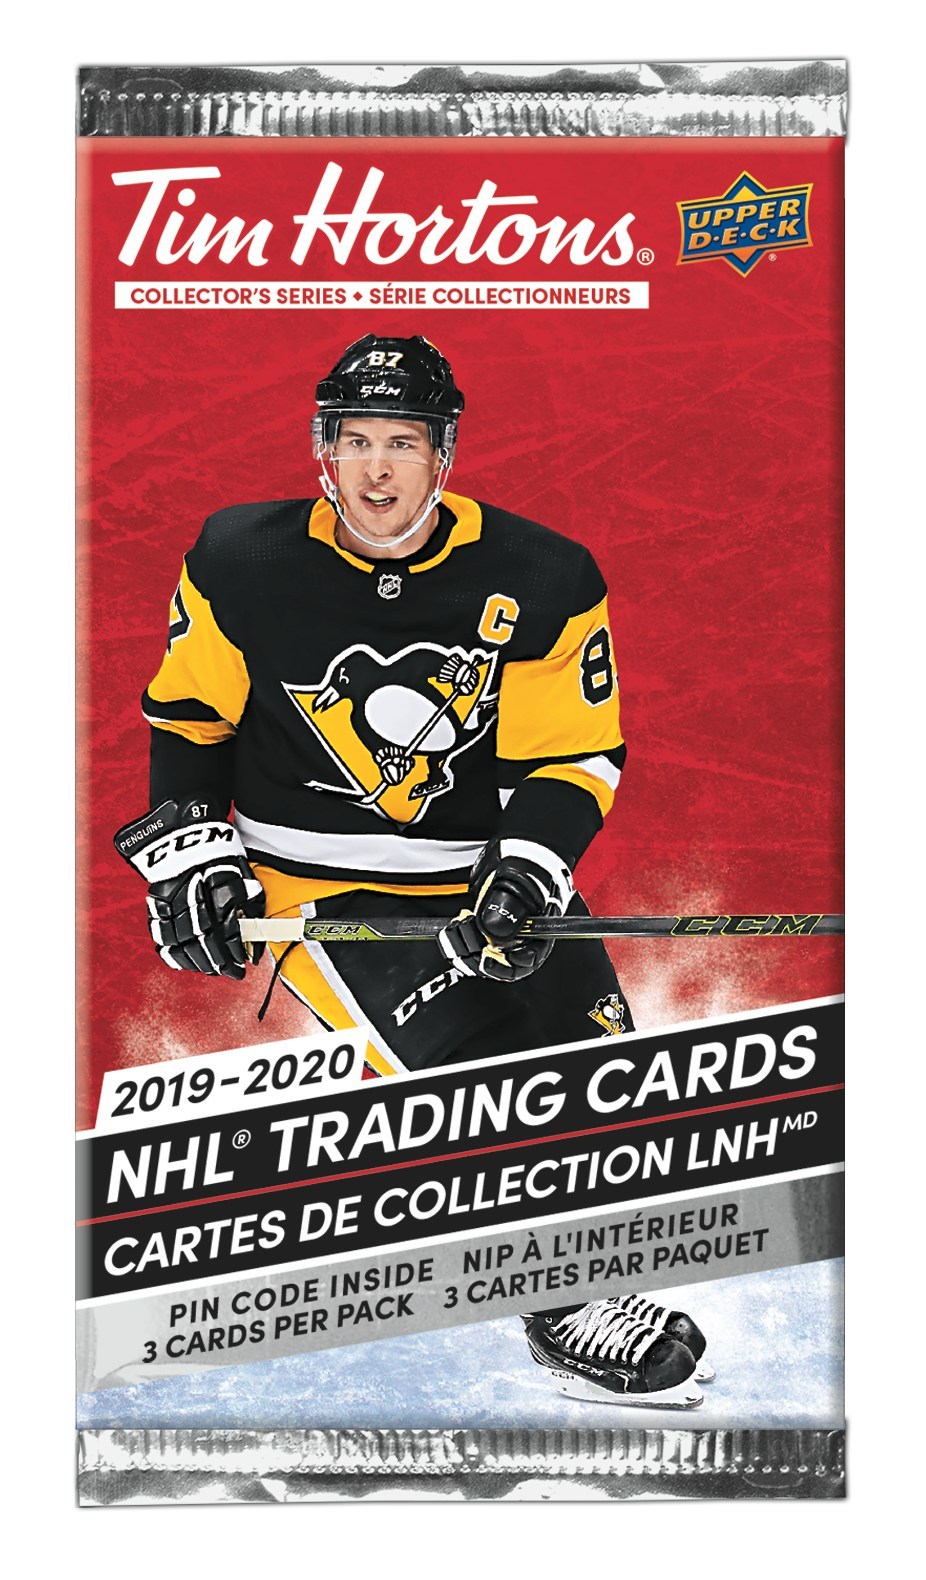 sidney crosby jersey relics card